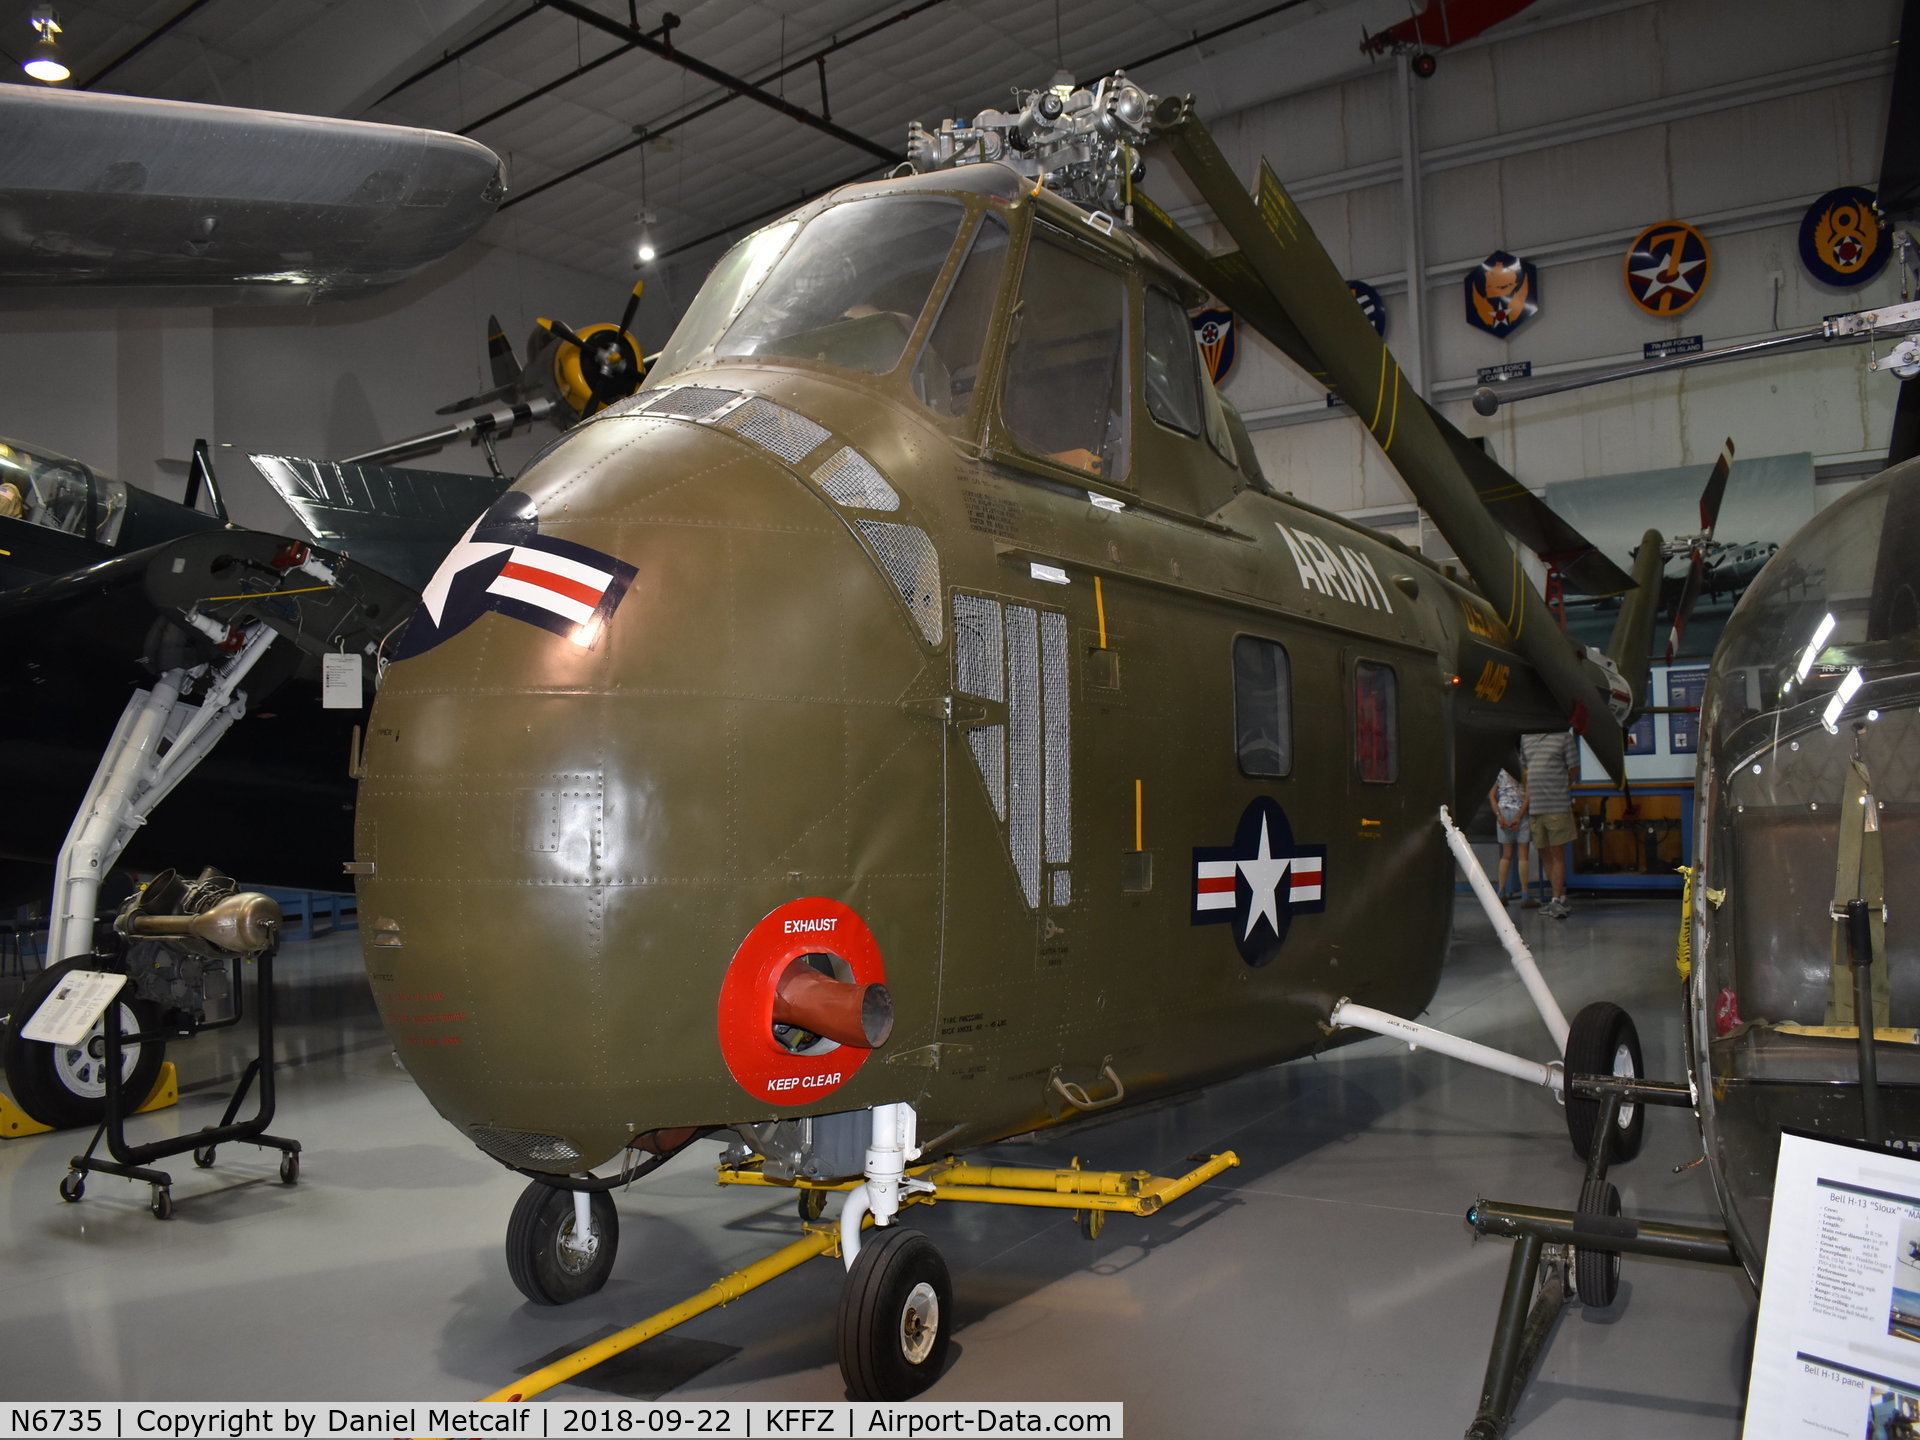 N6735, 1971 Sikorsky UH-19D Chickasaw C/N 54-1416, Seen inside the main hanger at the Arizona Commemorative Air Force Museum